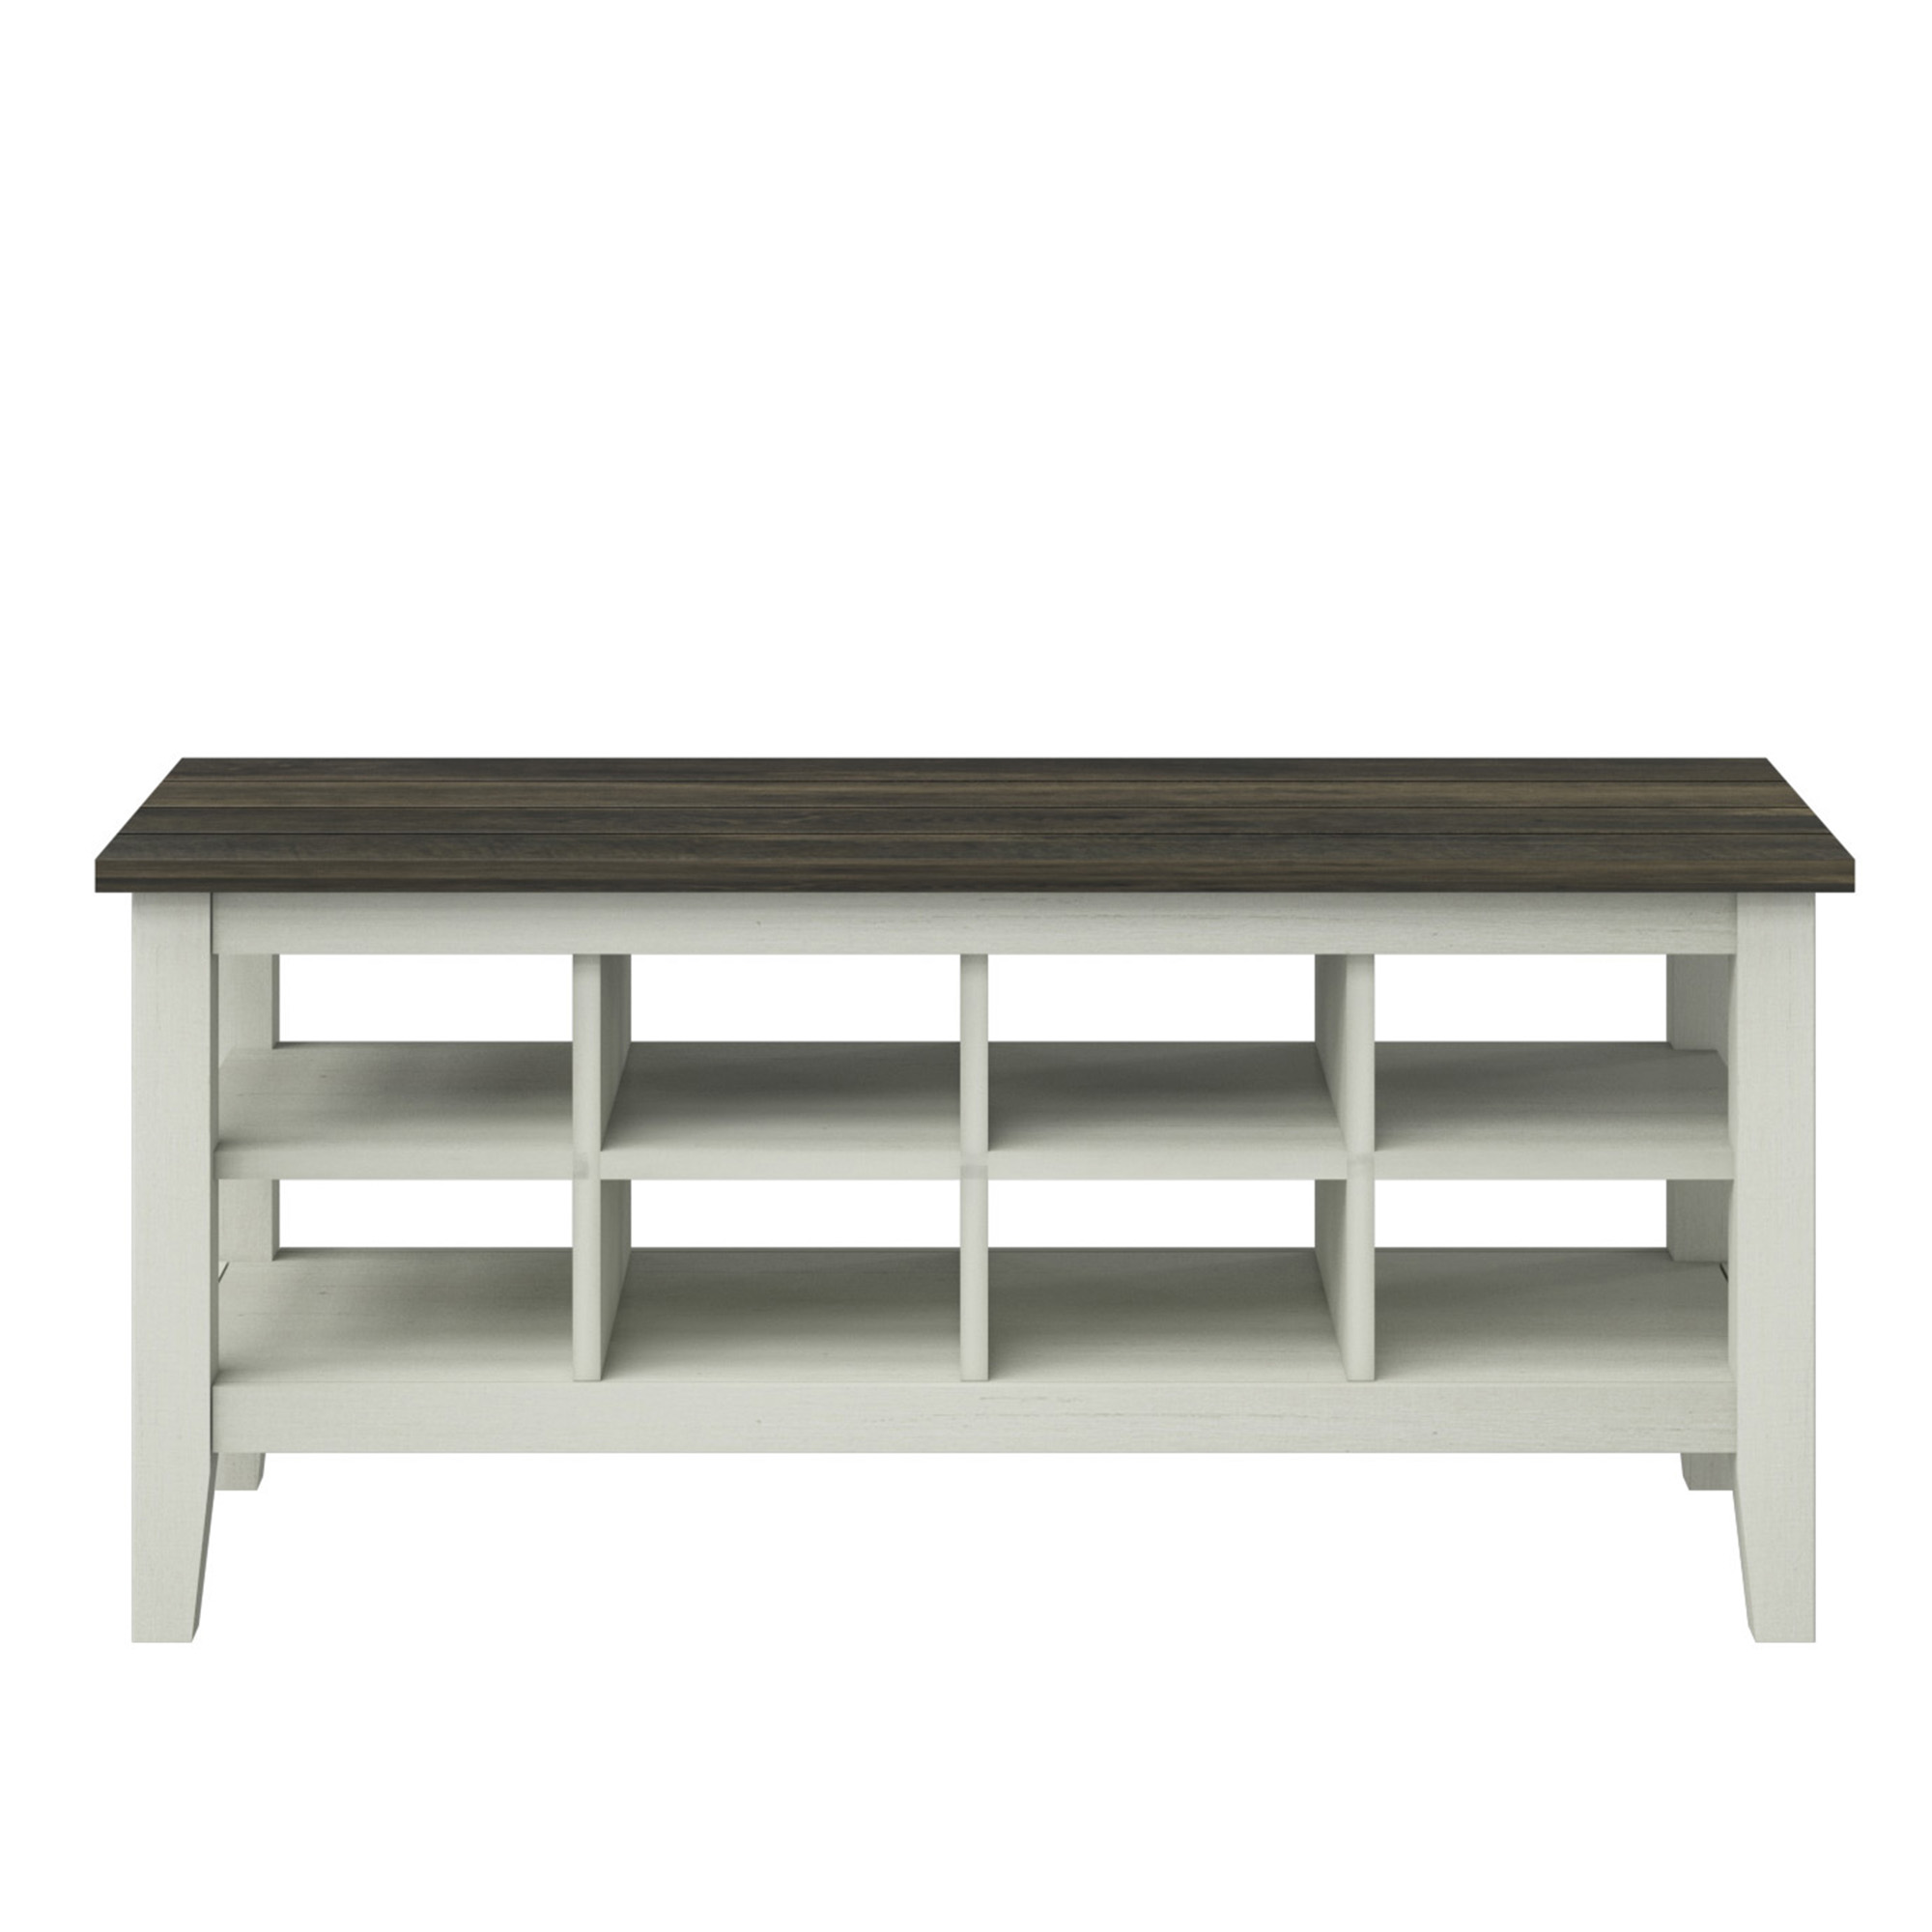 Twin Star Home Two-Tone Storage Bench with Planked Top in Old Wood White, 40”W x 15.5”D x 17.8”H - image 4 of 7